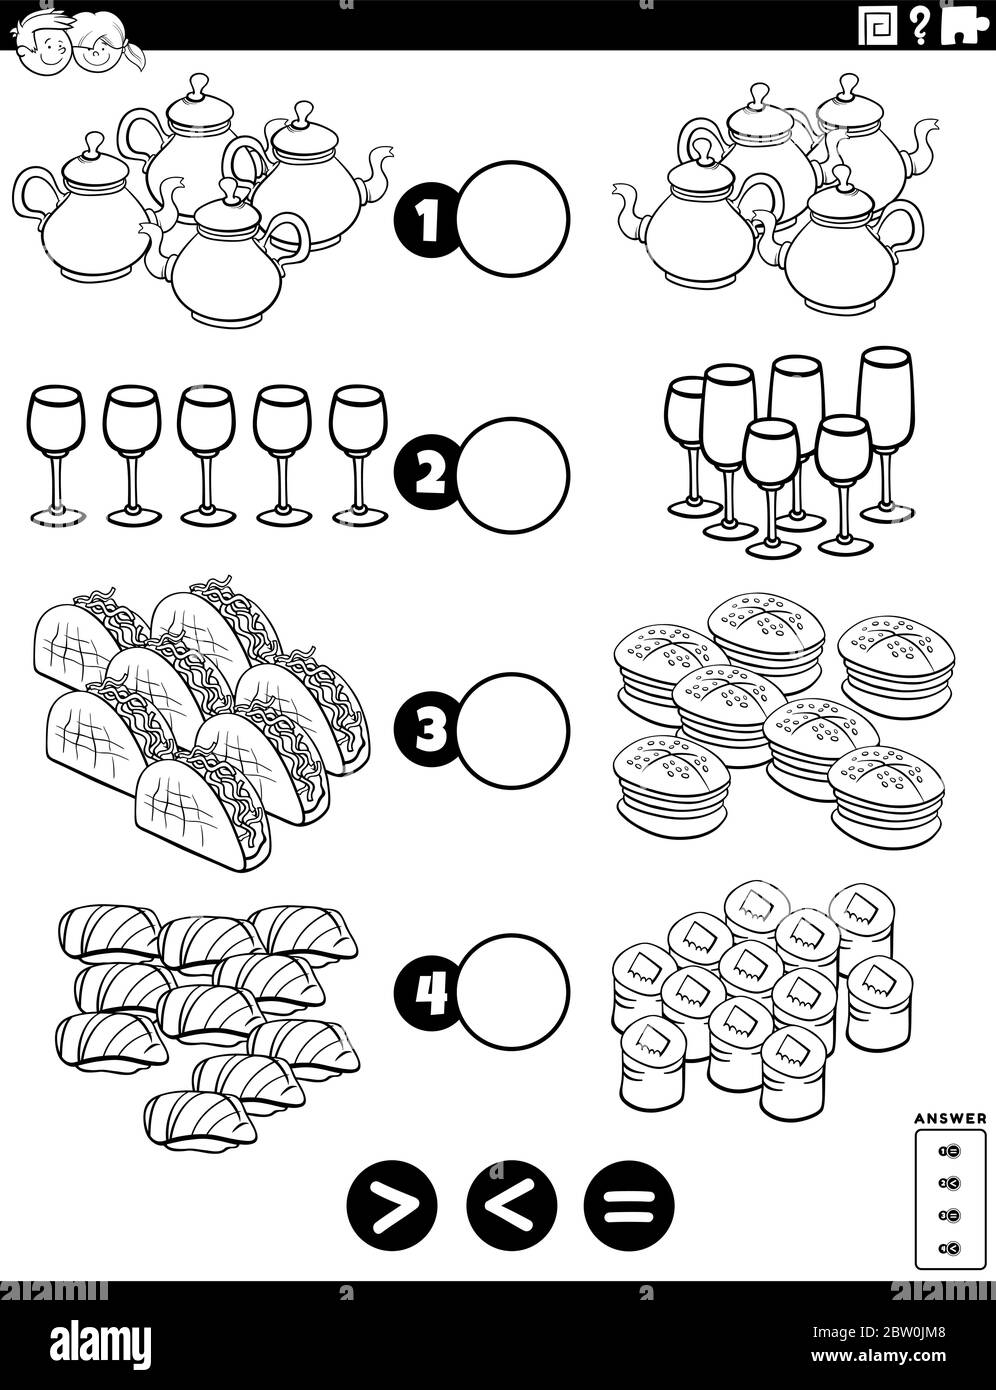 Black and White Cartoon Illustration of Educational Mathematical Puzzle Task of Greater Than, Less Than or Equal to for Children with Food Objests Col Stock Vector